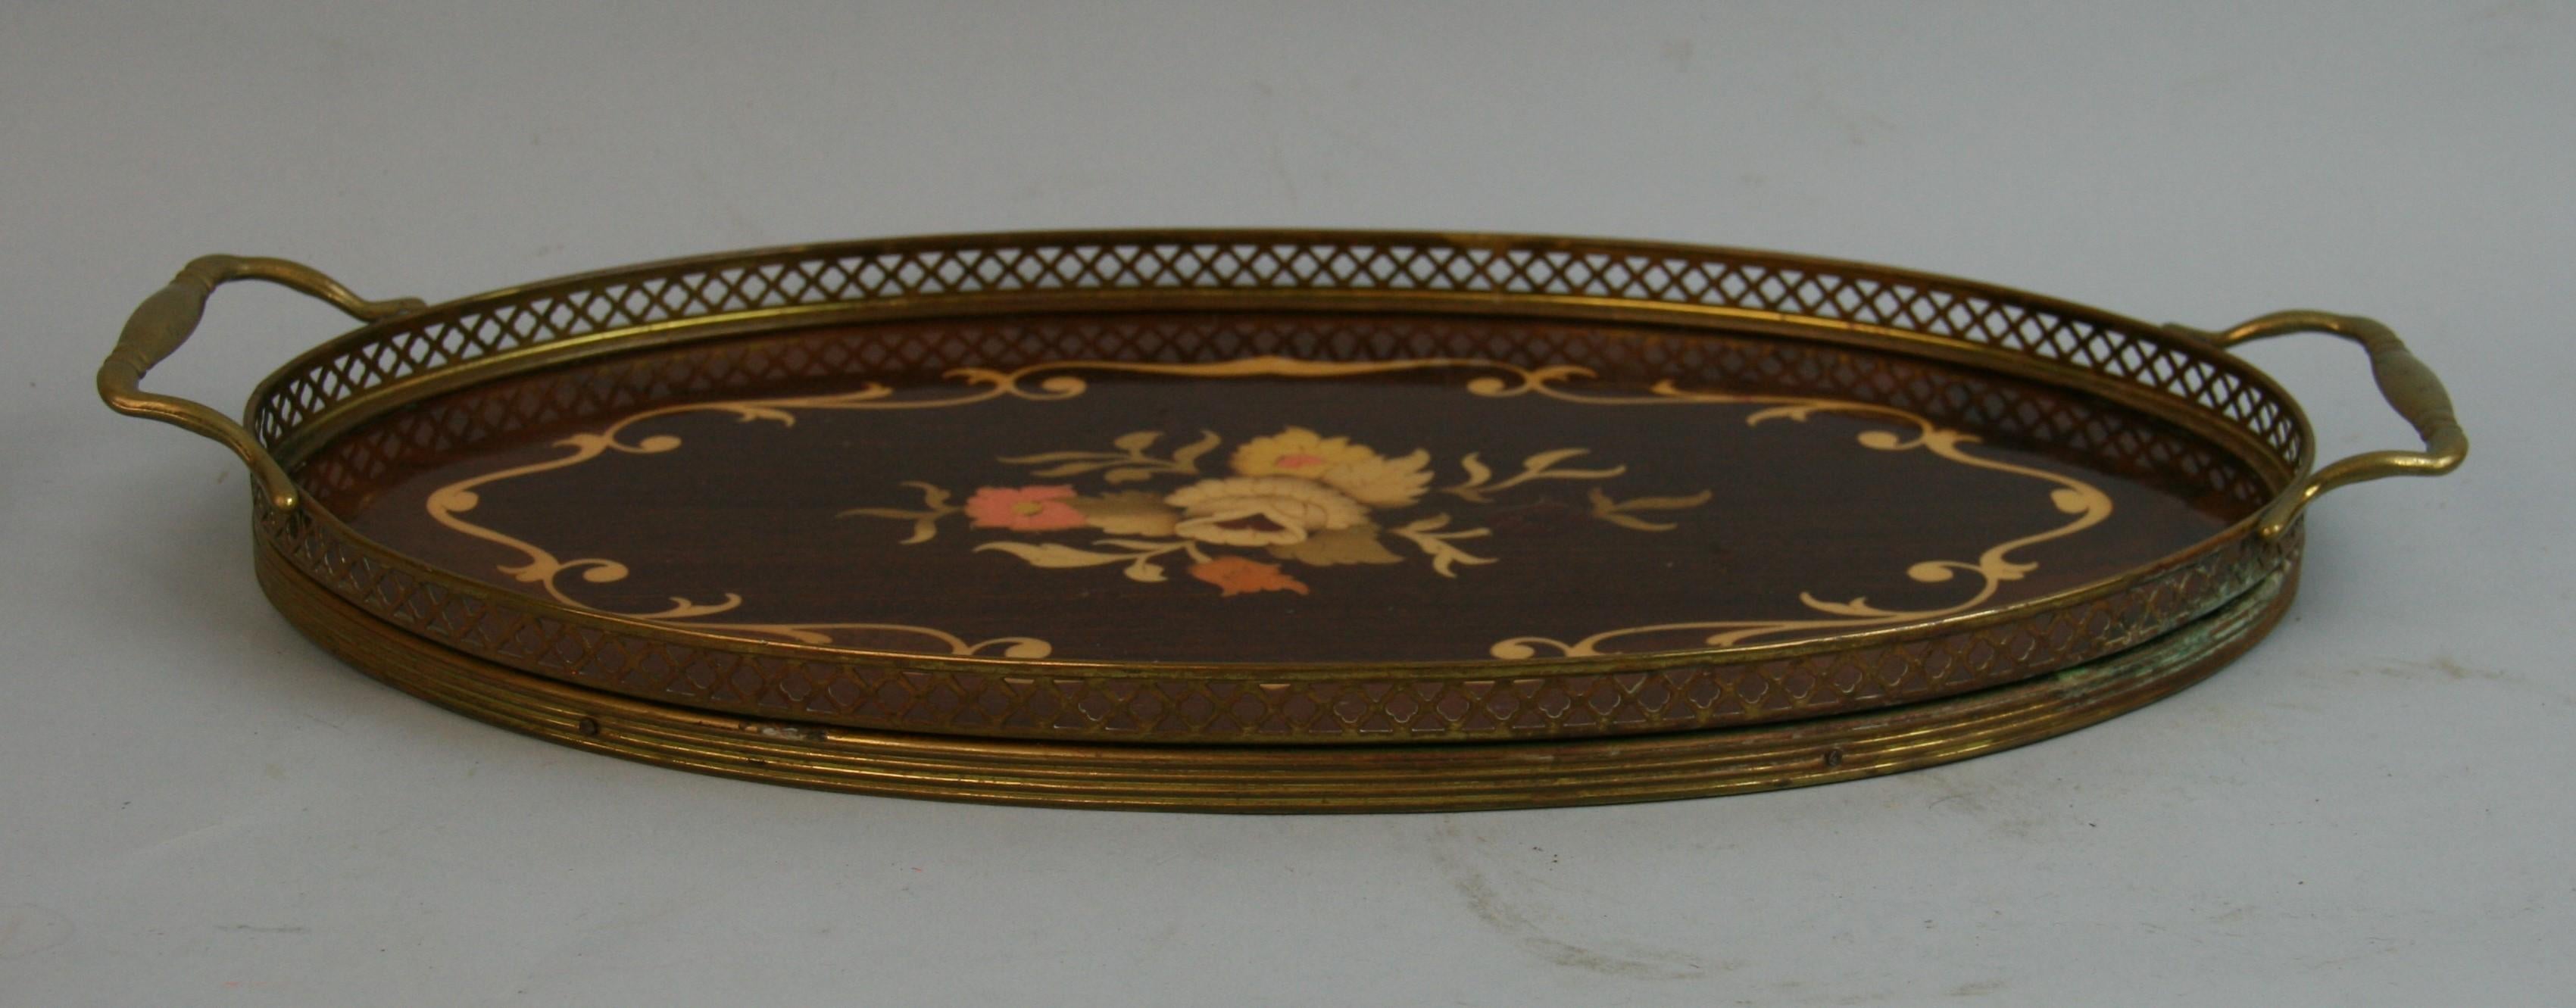 Italian Serving Tray Inlaid Wood Brass Rim and Handles, 1960's In Good Condition For Sale In Douglas Manor, NY